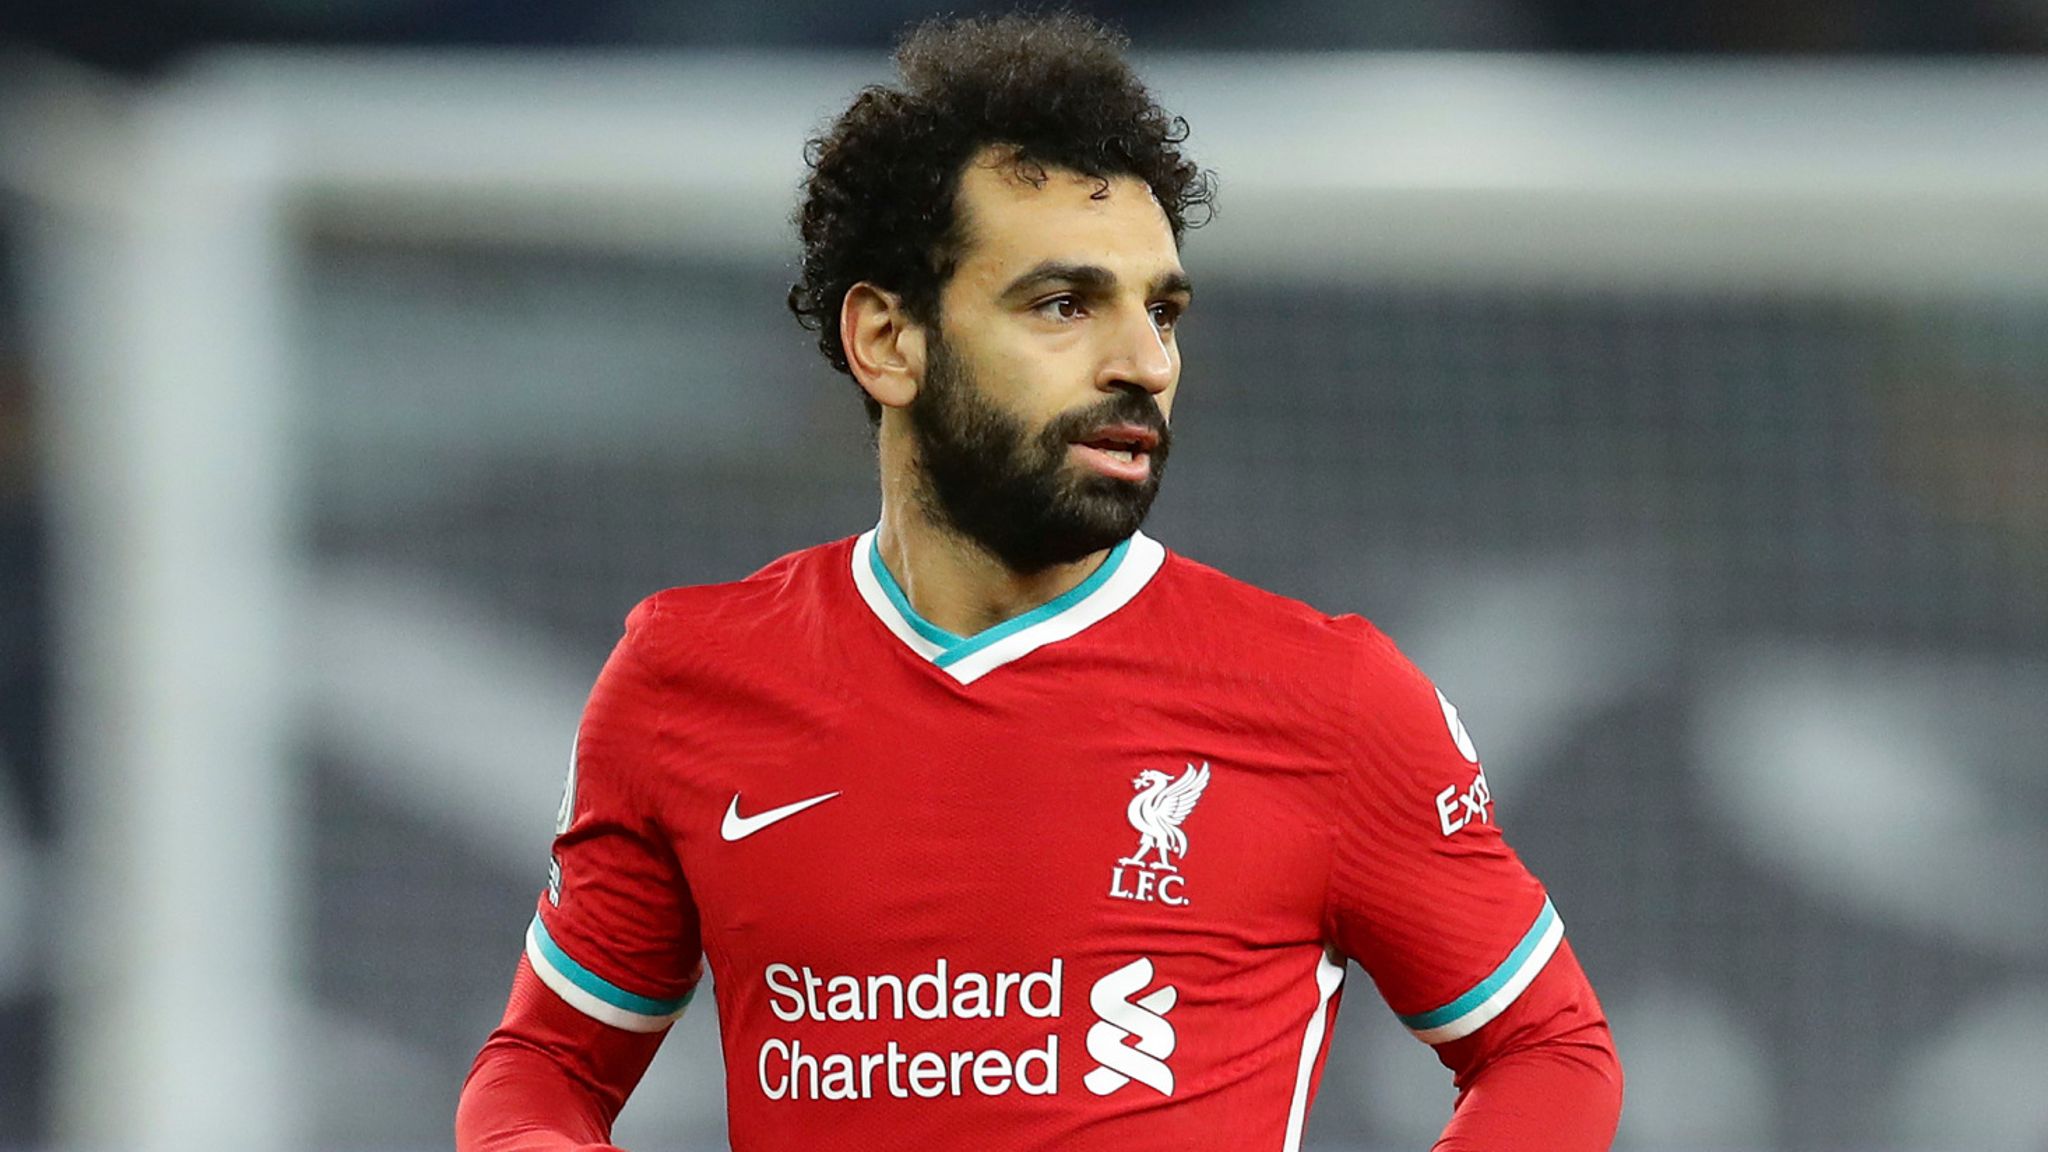 Mohamed Salah: Liverpool forward admits he 'may be' open to a future move to Real Madrid or Barcelona